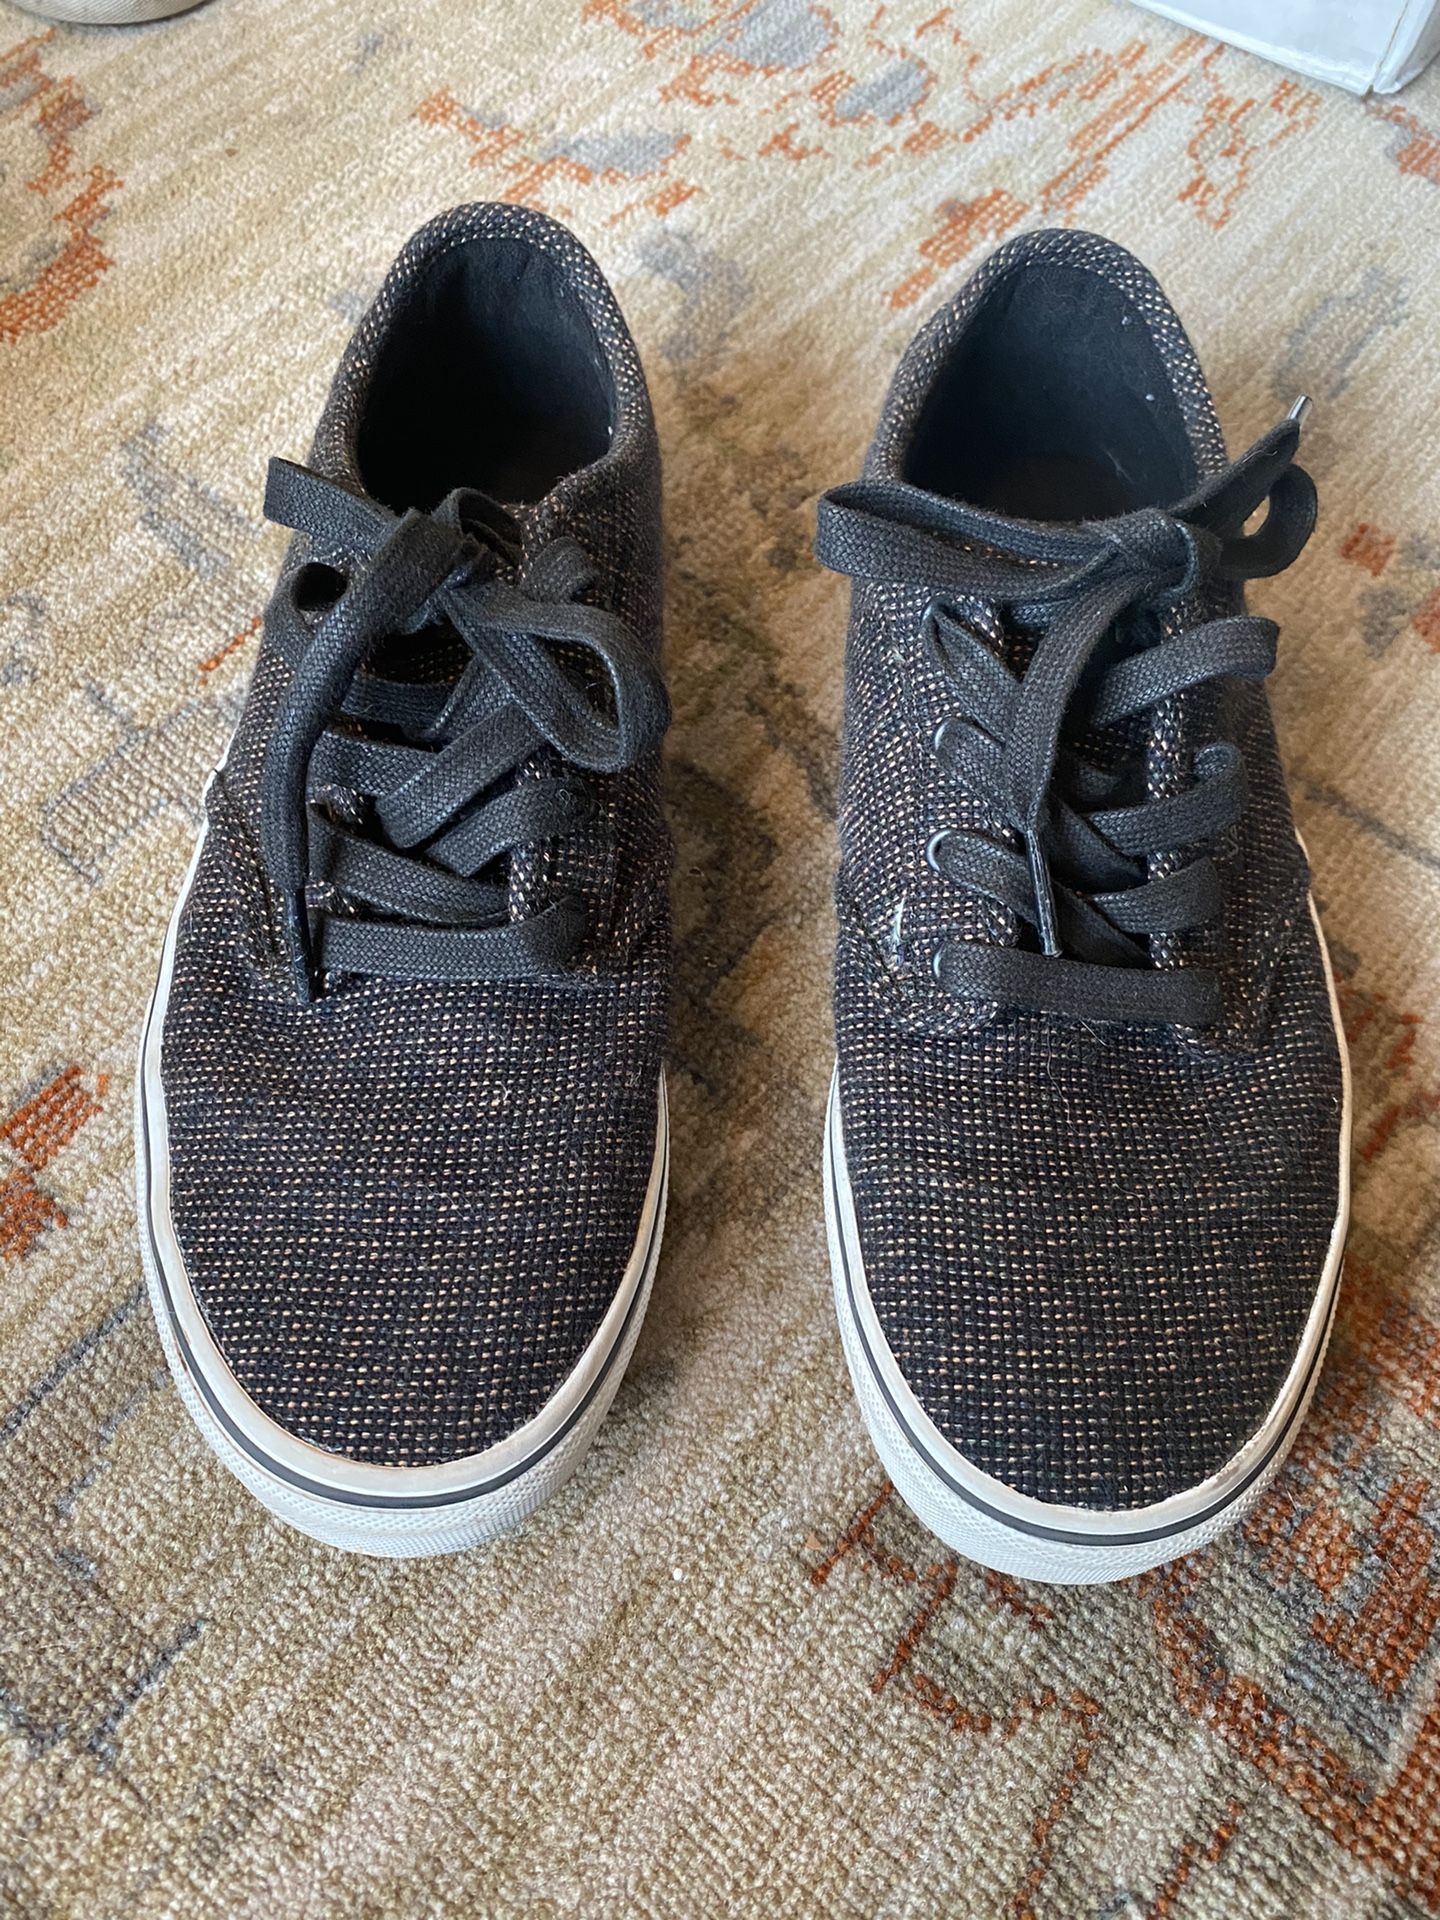 VANS - youth size 5.5